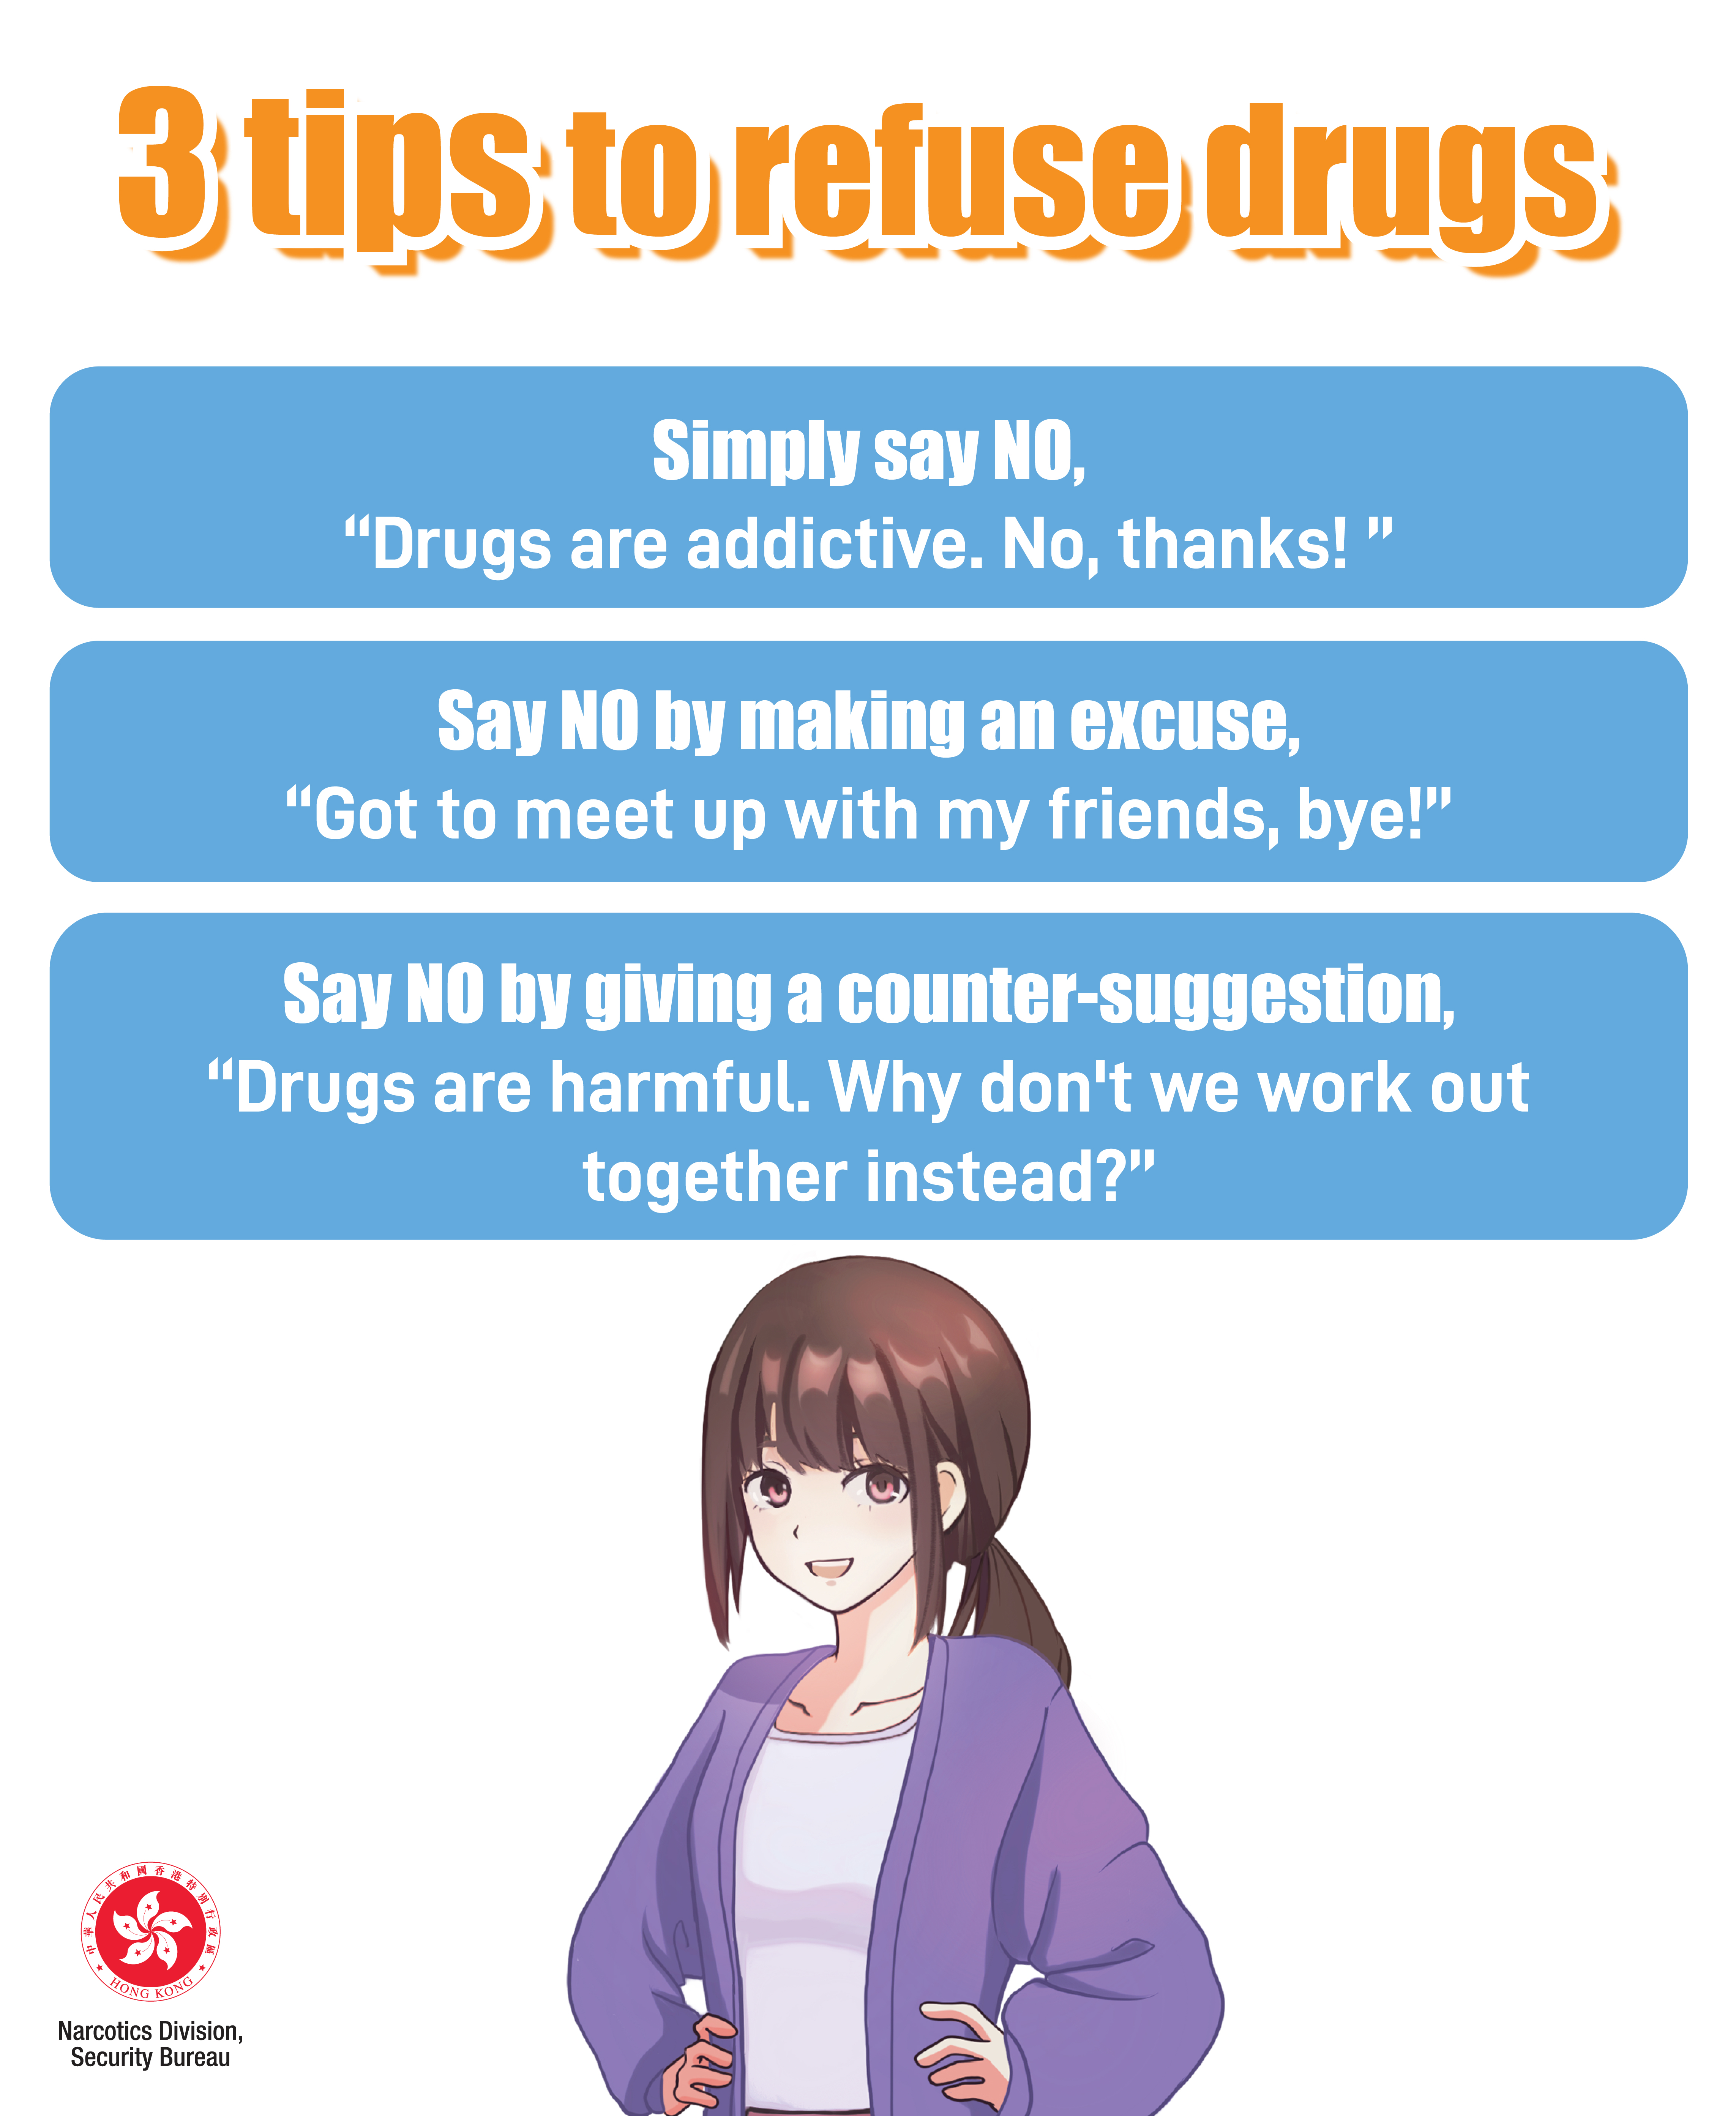 3 tips to refuse drugs Poster